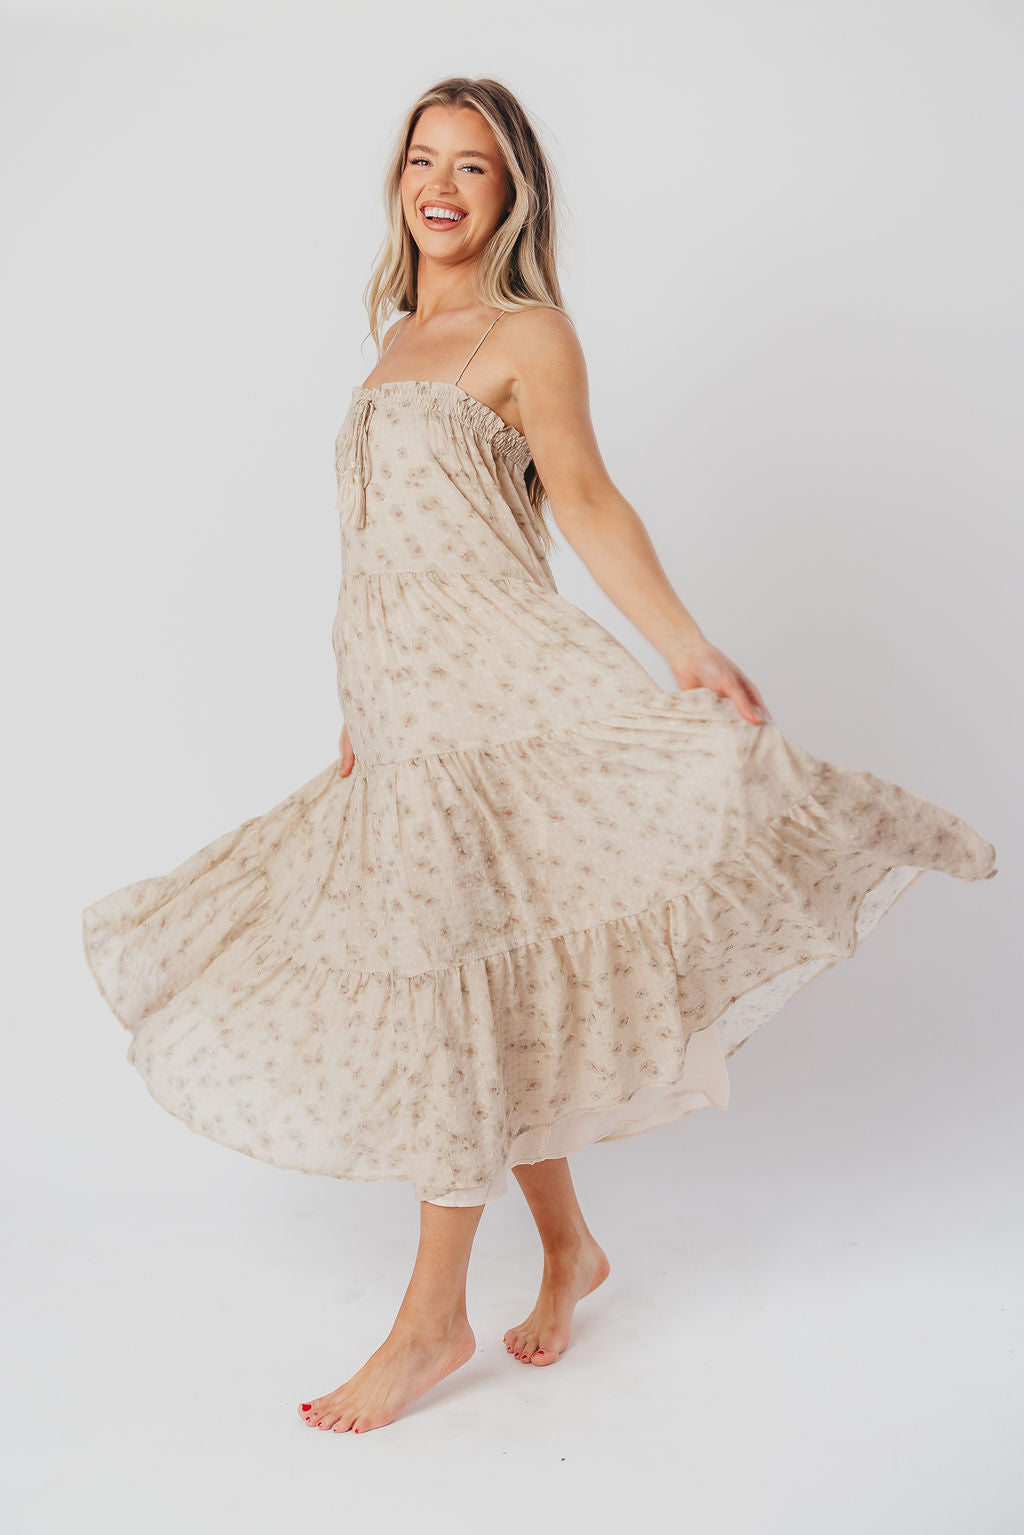 Micah Tasseled Maxi Dress in Champagne Floral